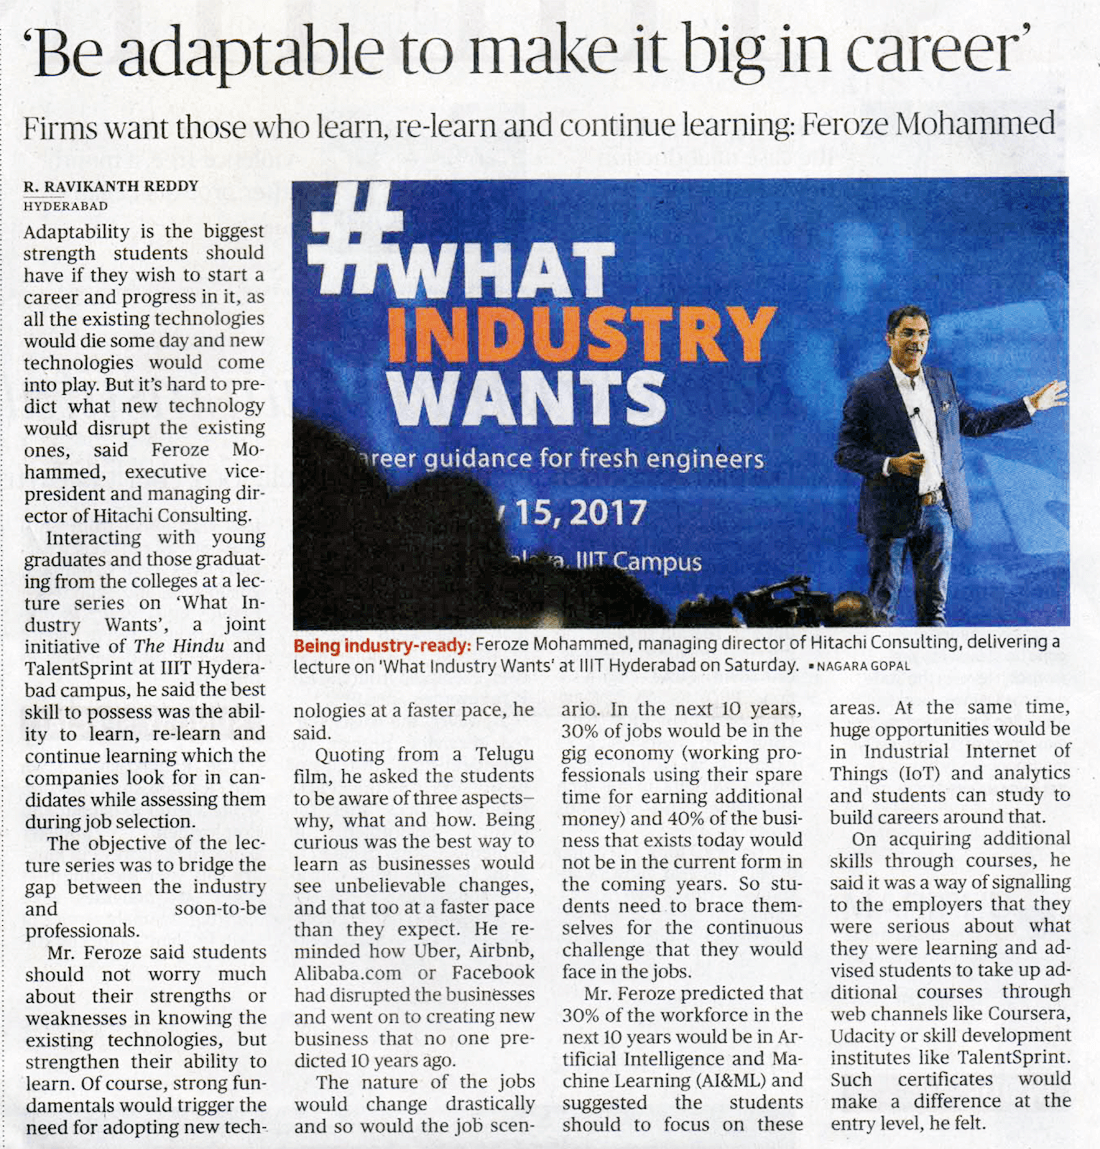 Be adaptable to make it big in career